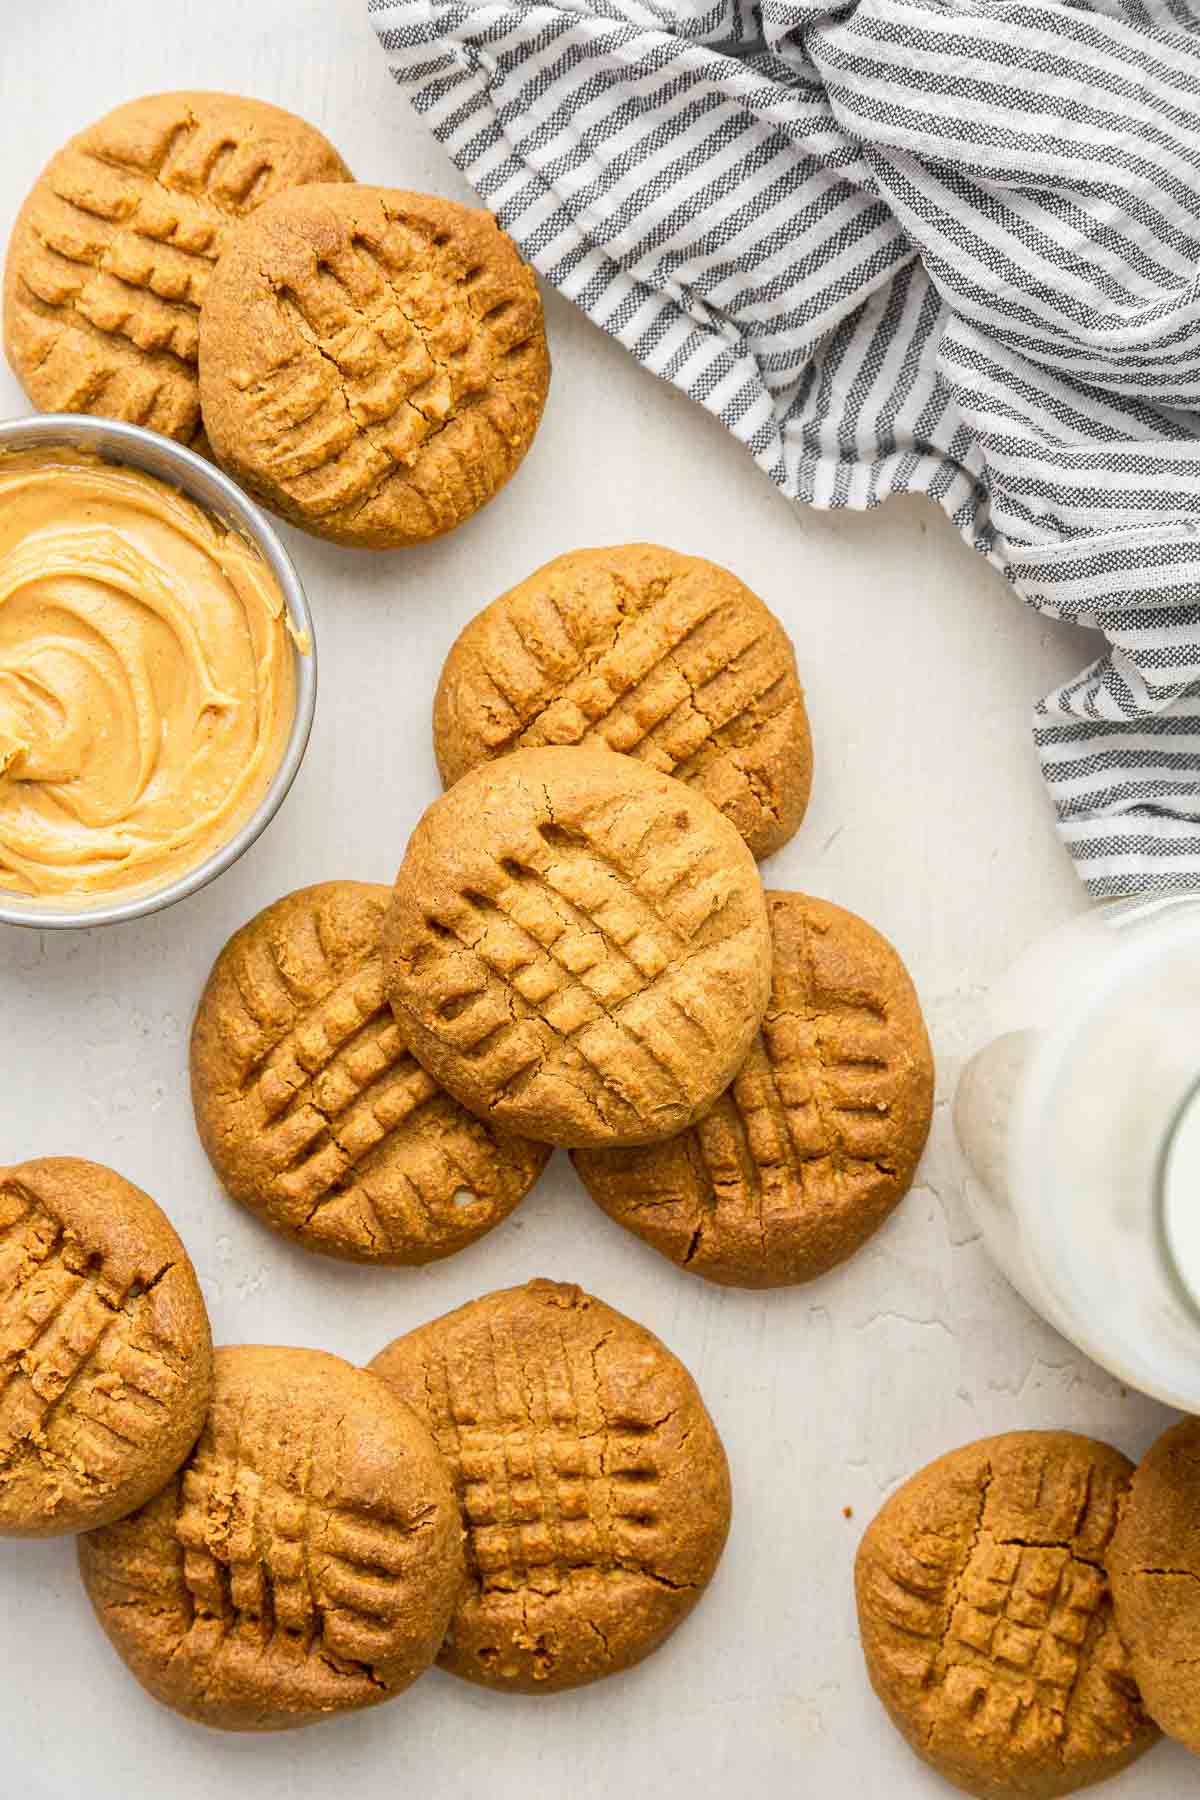 How to Make Peanut Butter in Only 5 Minutes (1 ingredient